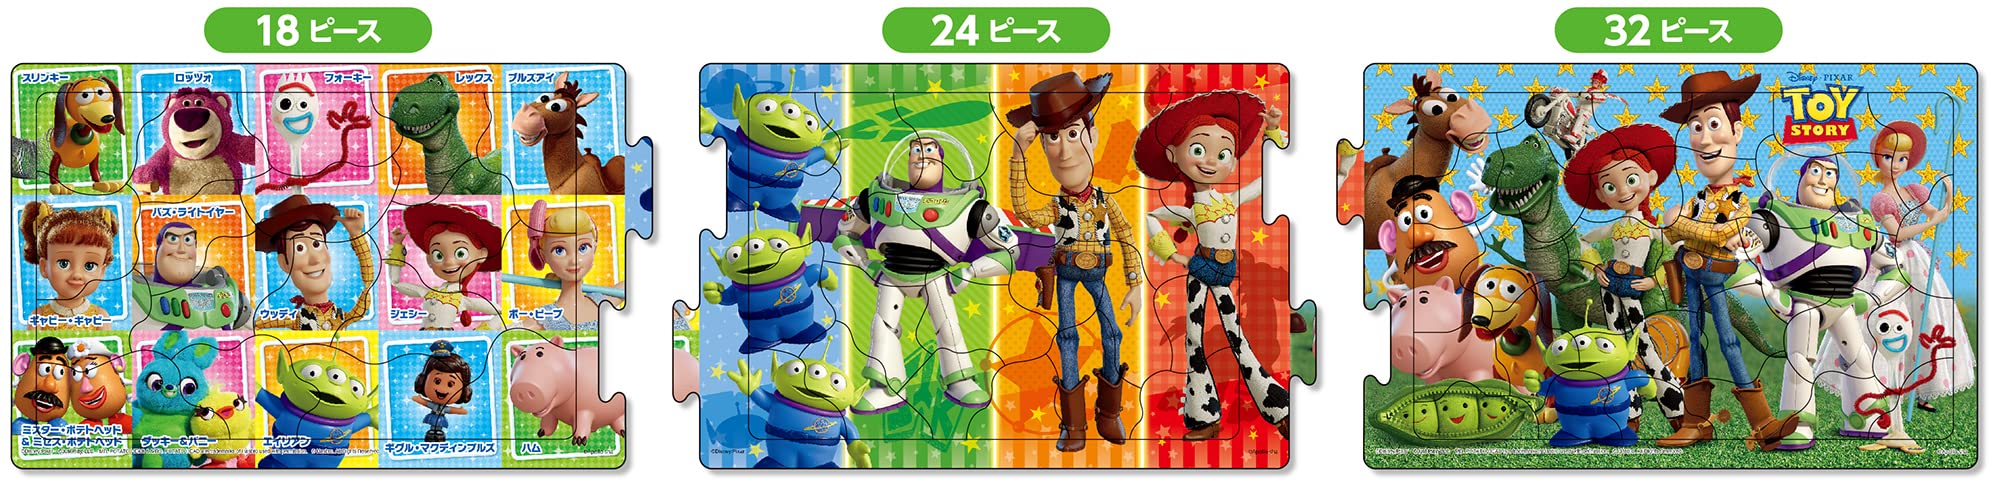 Apollo-Sha 24-171 Jigsaw Puzzle Disney Toy Story Panorama Puzzle 18+24+32 Pieces